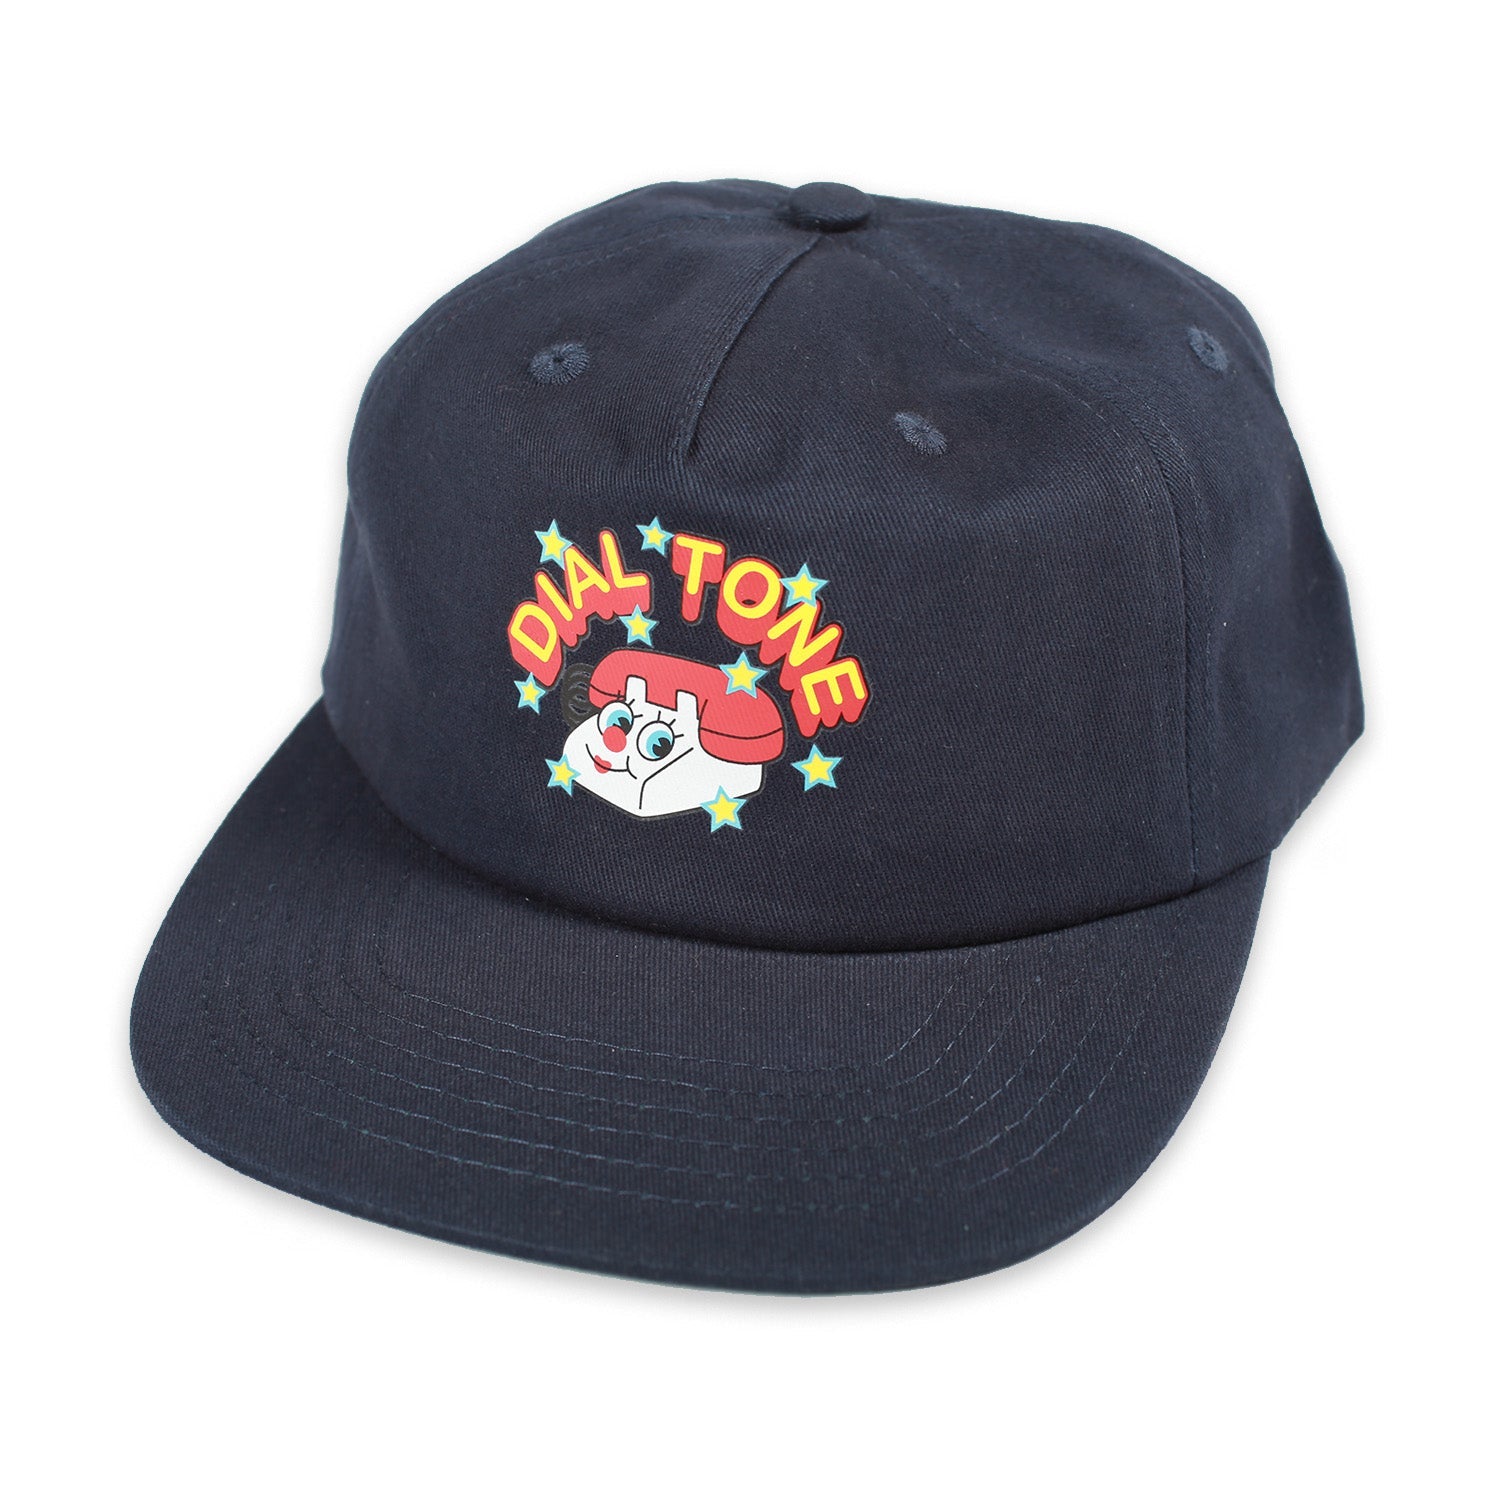 Dial Tone Chatter Snapback Hat Royal Hats Dial Tone 